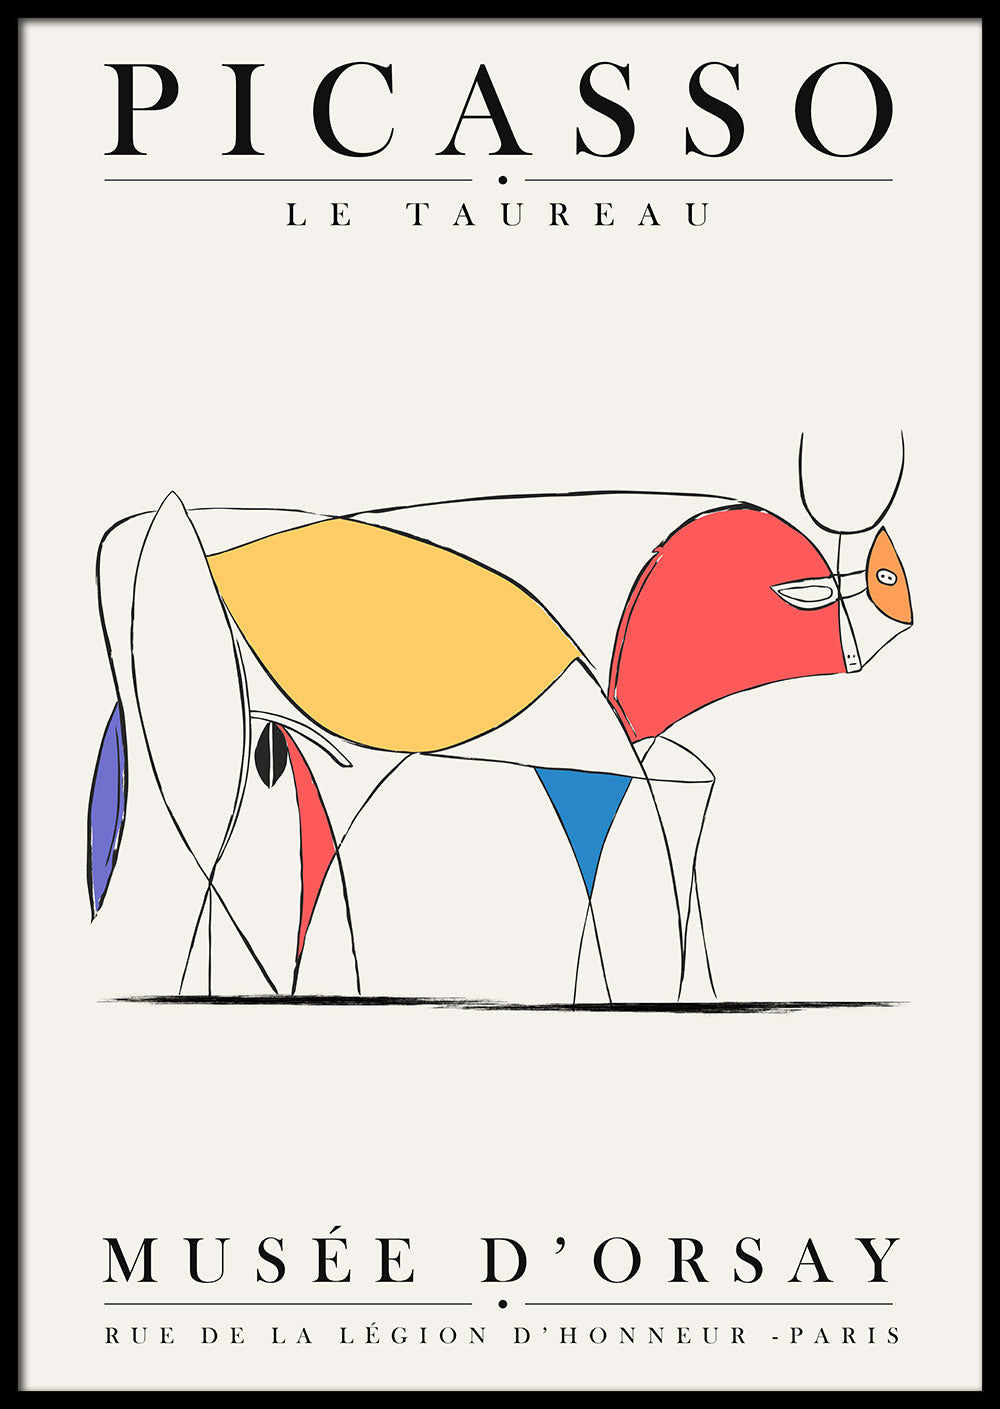 Taureau by Pablo Picasso 🎨 – Posters of